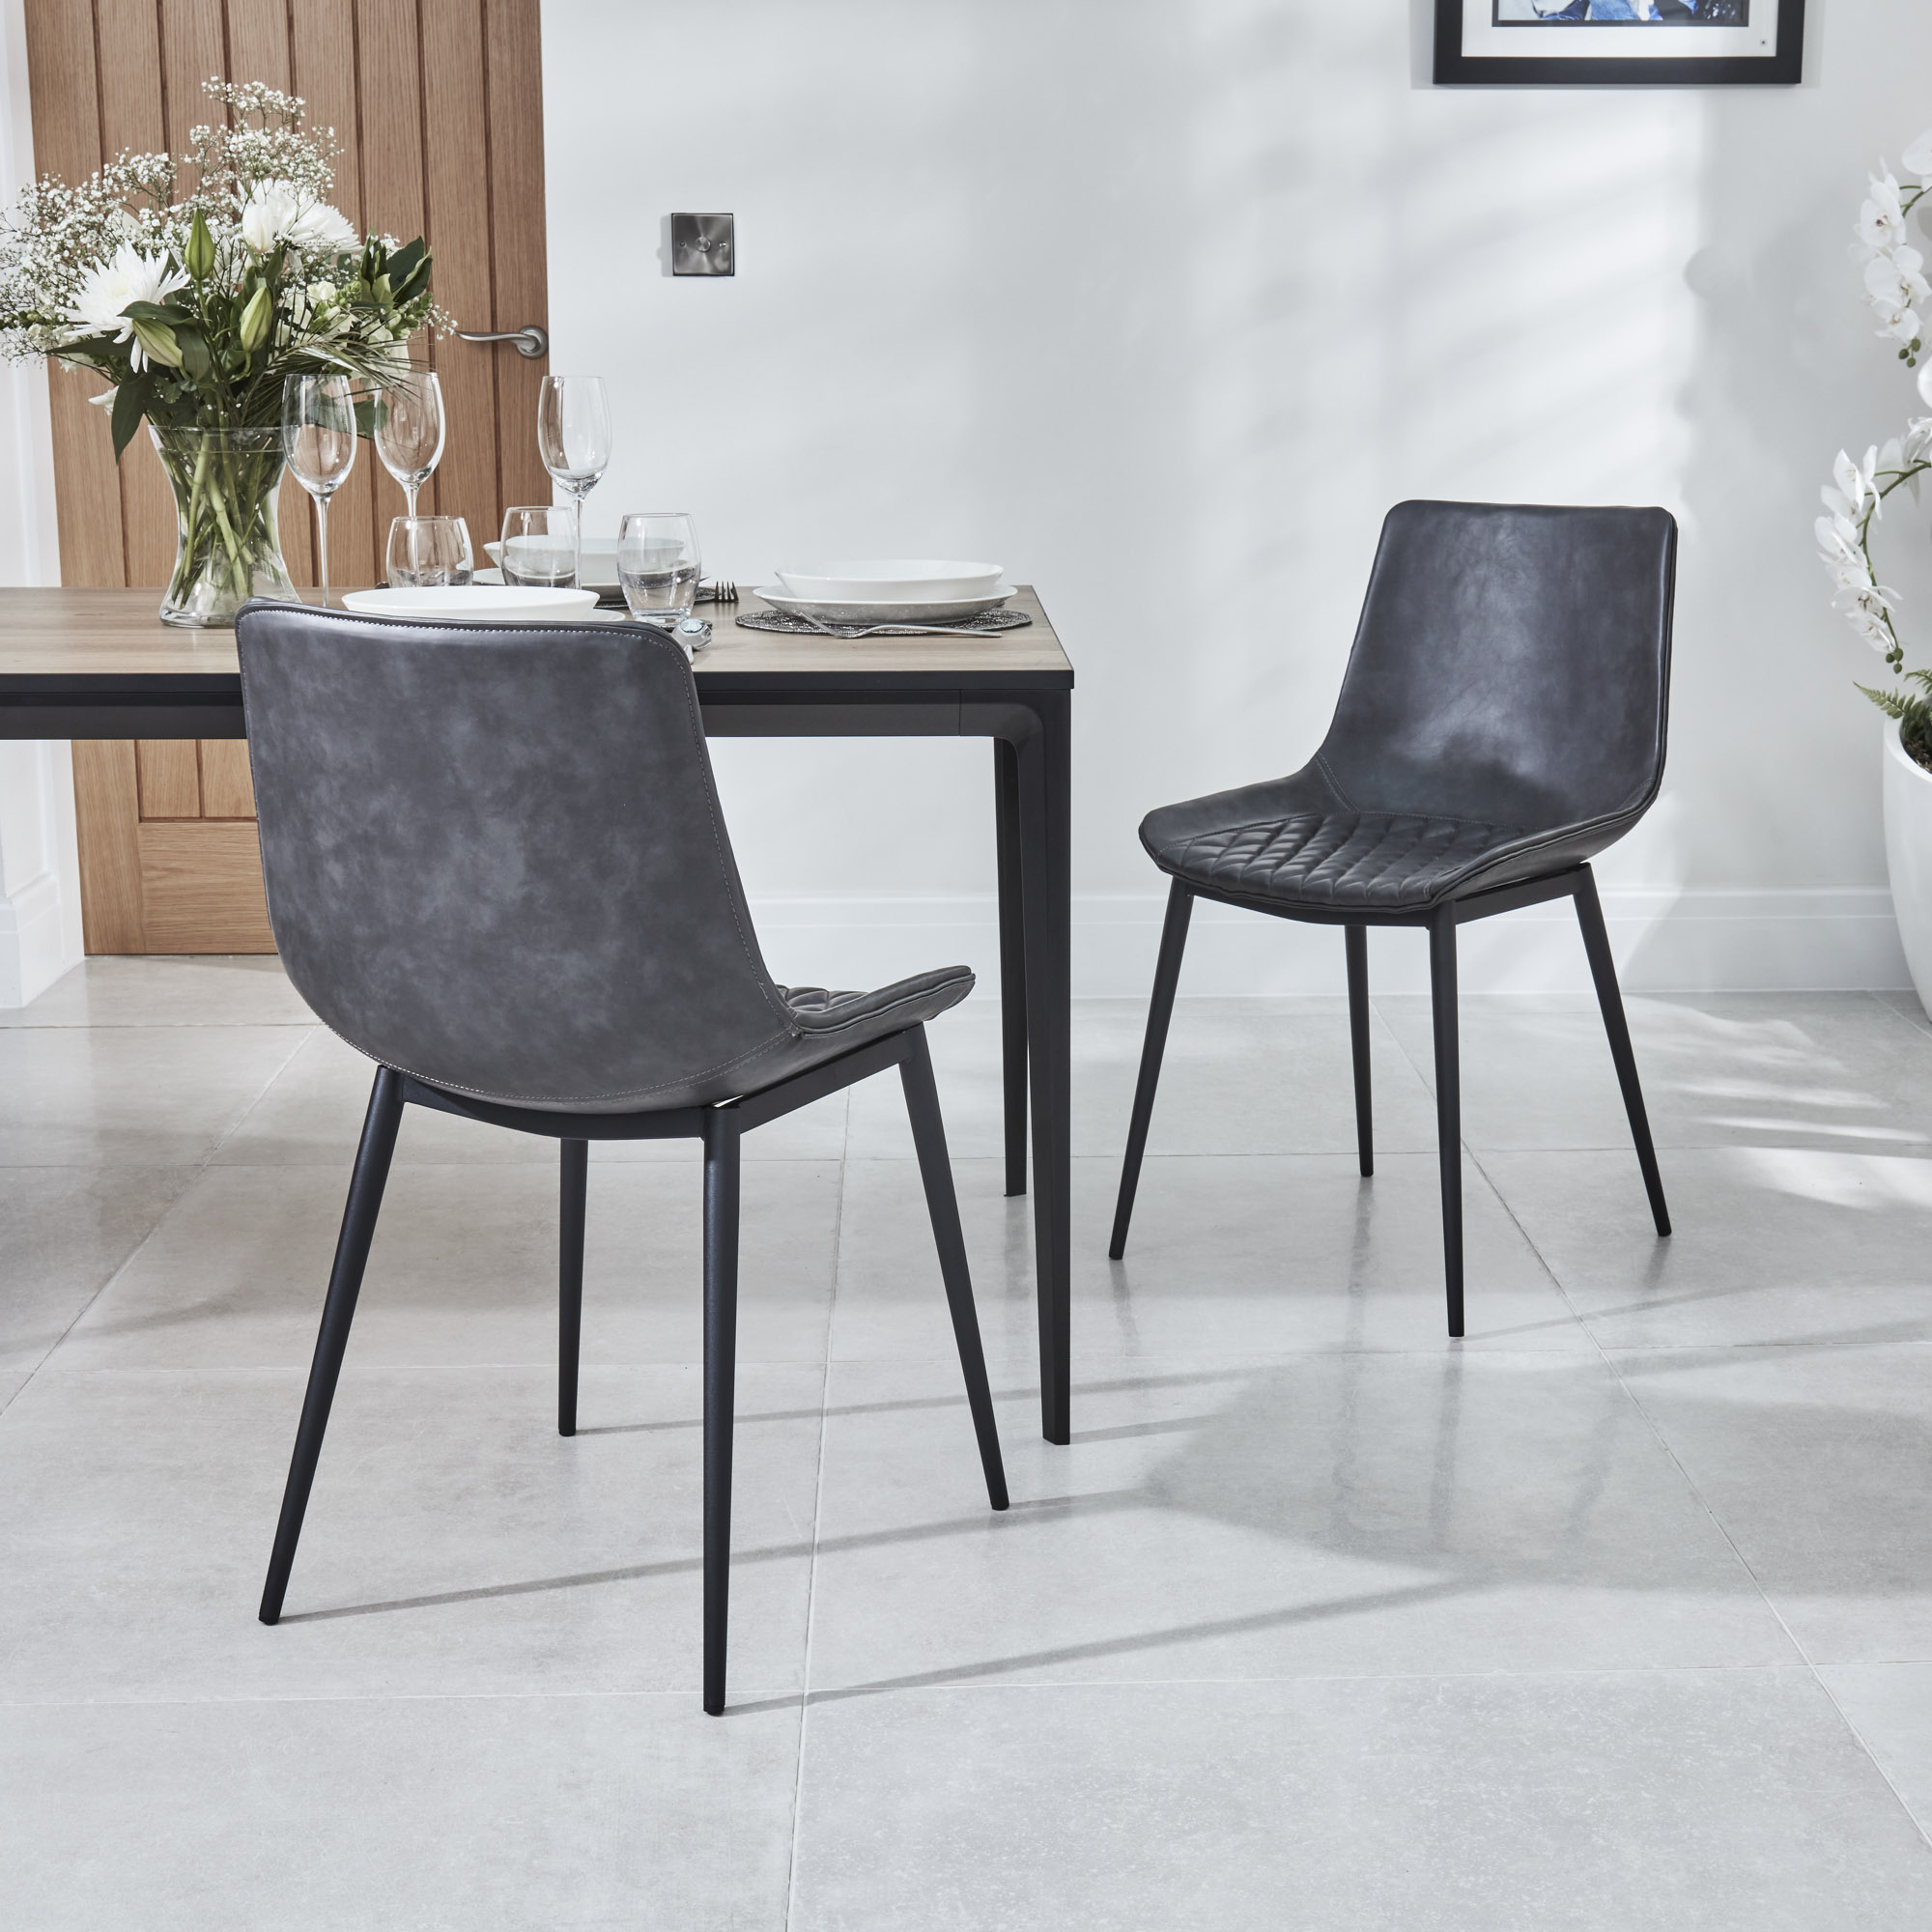 Bellagio 90cm Square Natural Oak Melamine Dining Table with 4x Leo Grey Dining Chairs